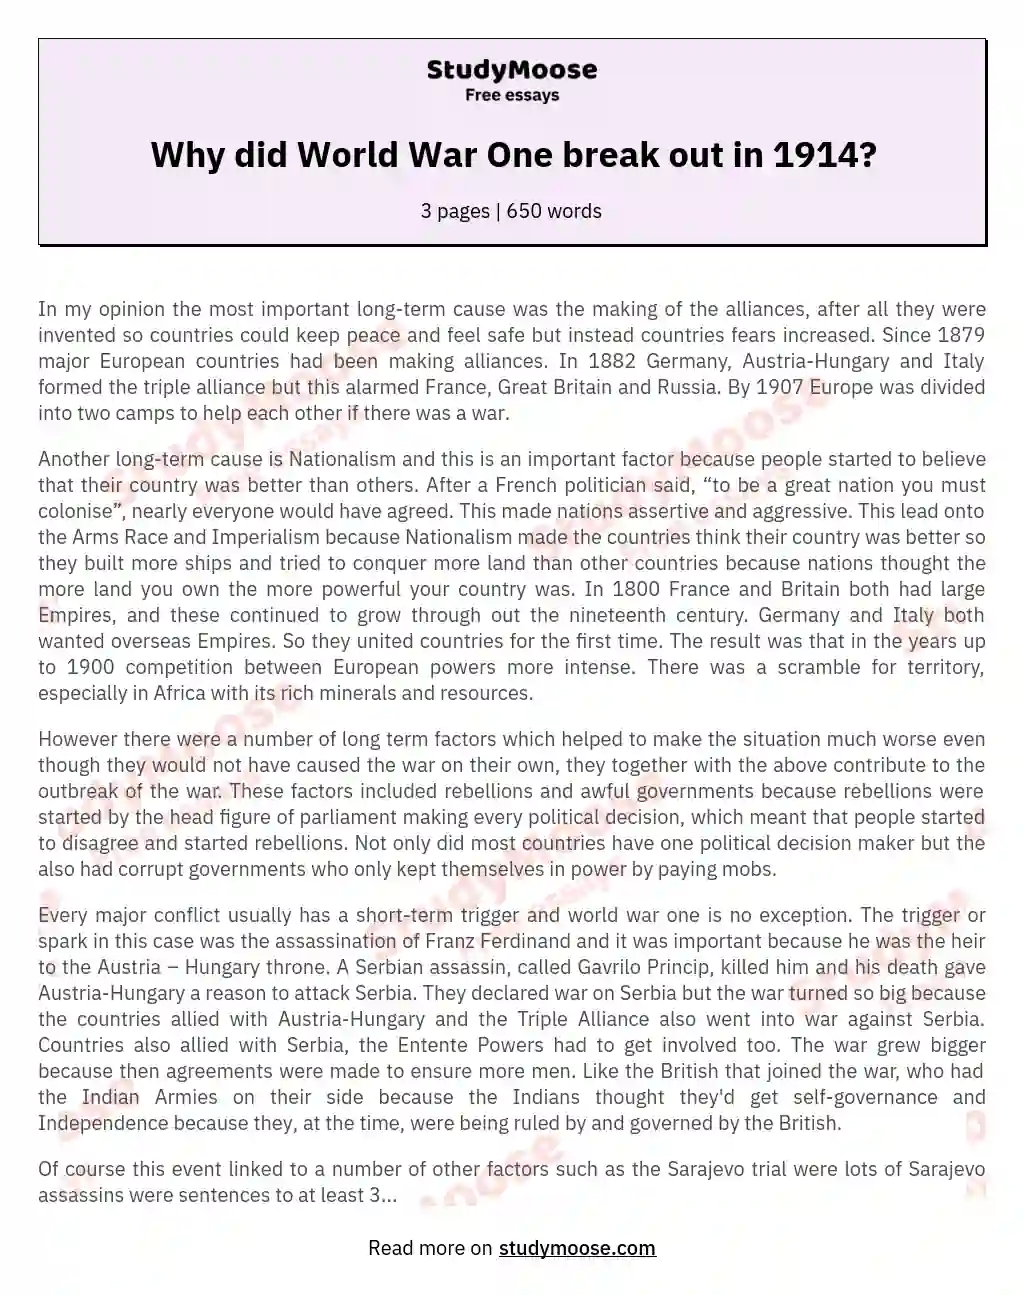 why did world war 1 break out in 1914 essay